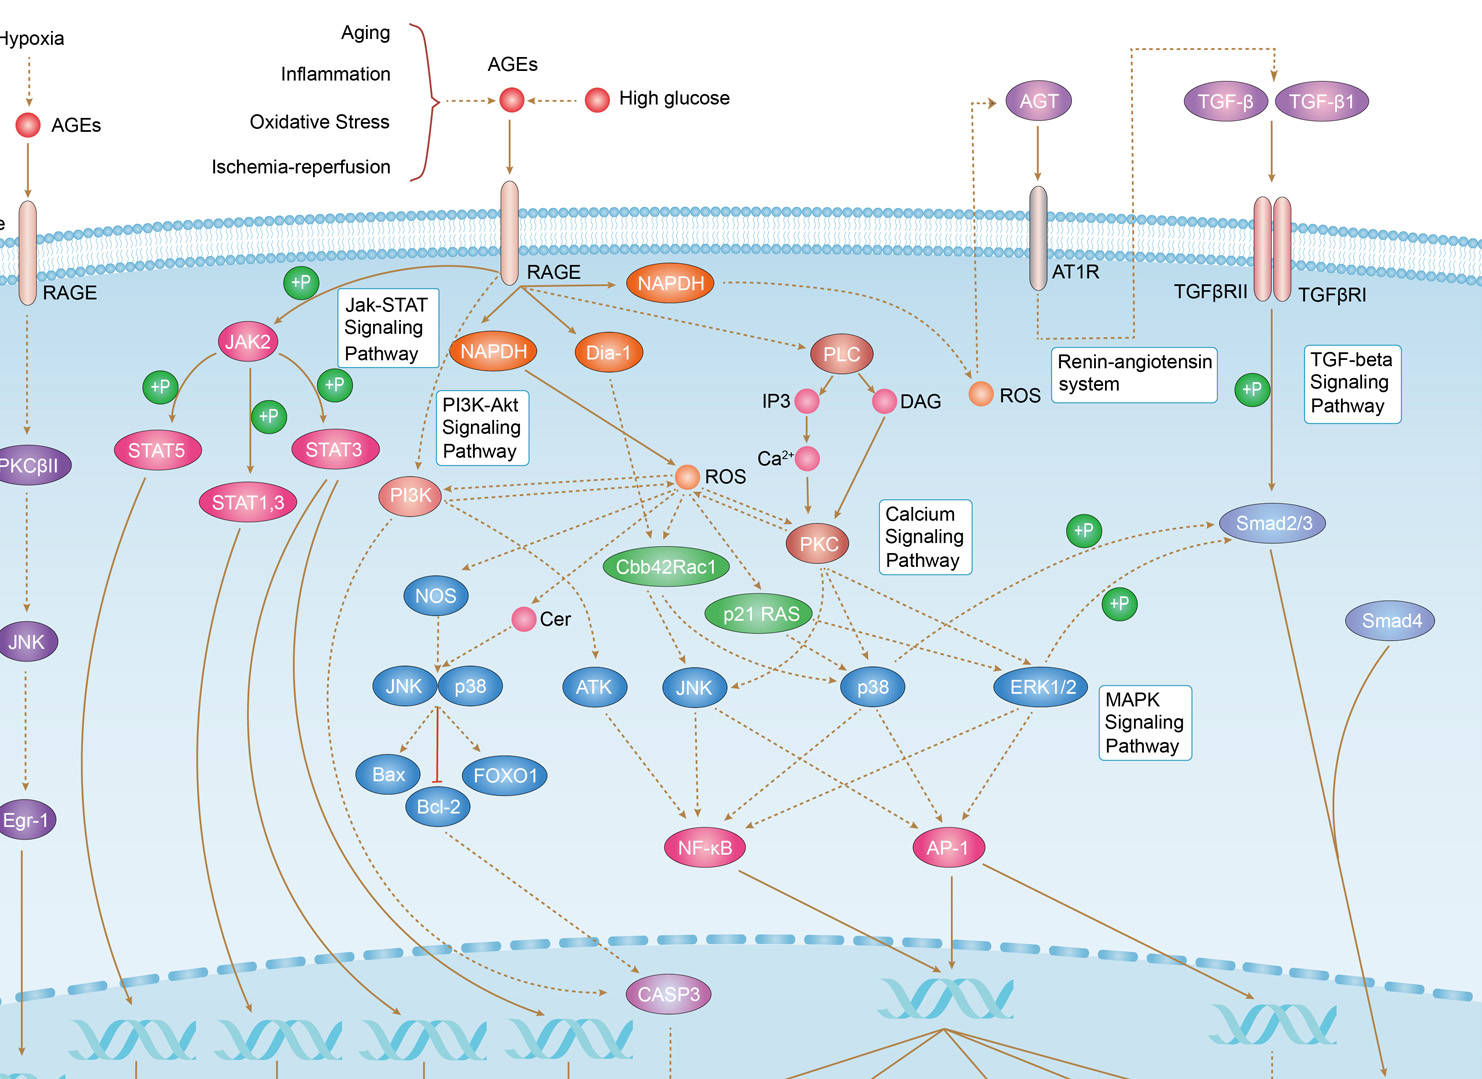 AGE-RAGE Signaling Pathway in Diabetic Complications